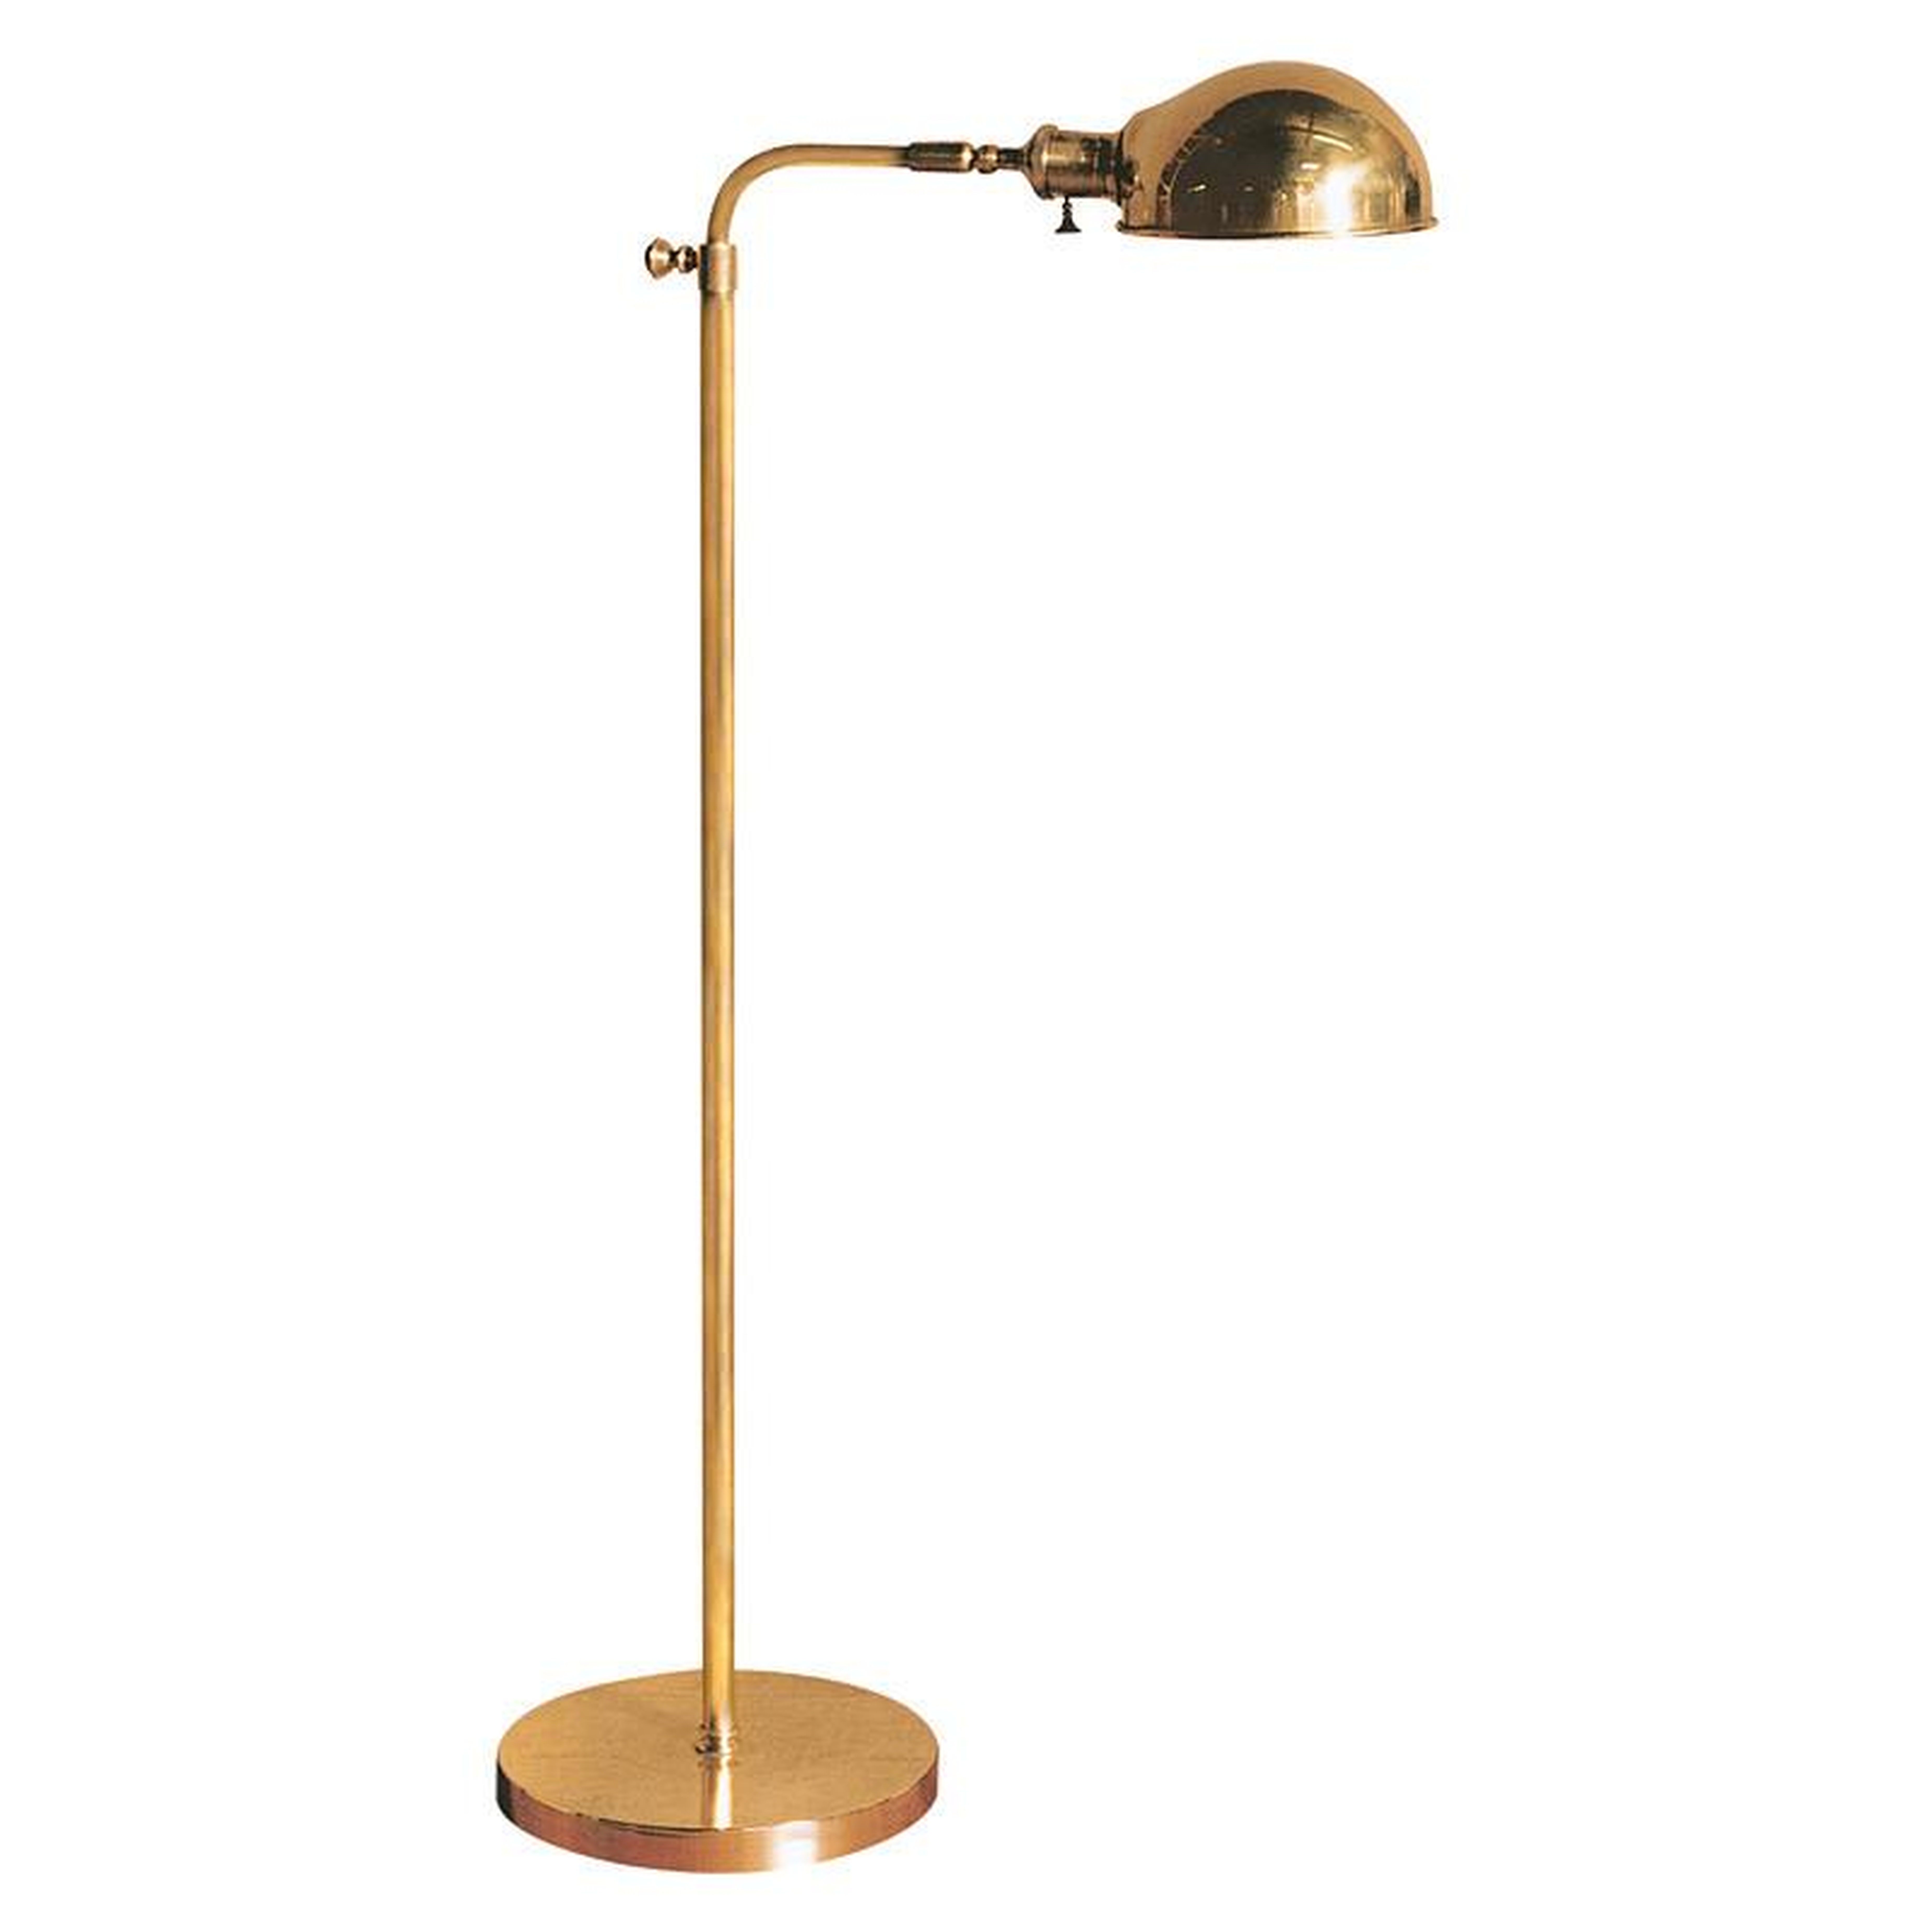 OLD PHARMACY FLOOR LAMP - HAND-RUBBED ANTIQUE BRASS - McGee & Co.